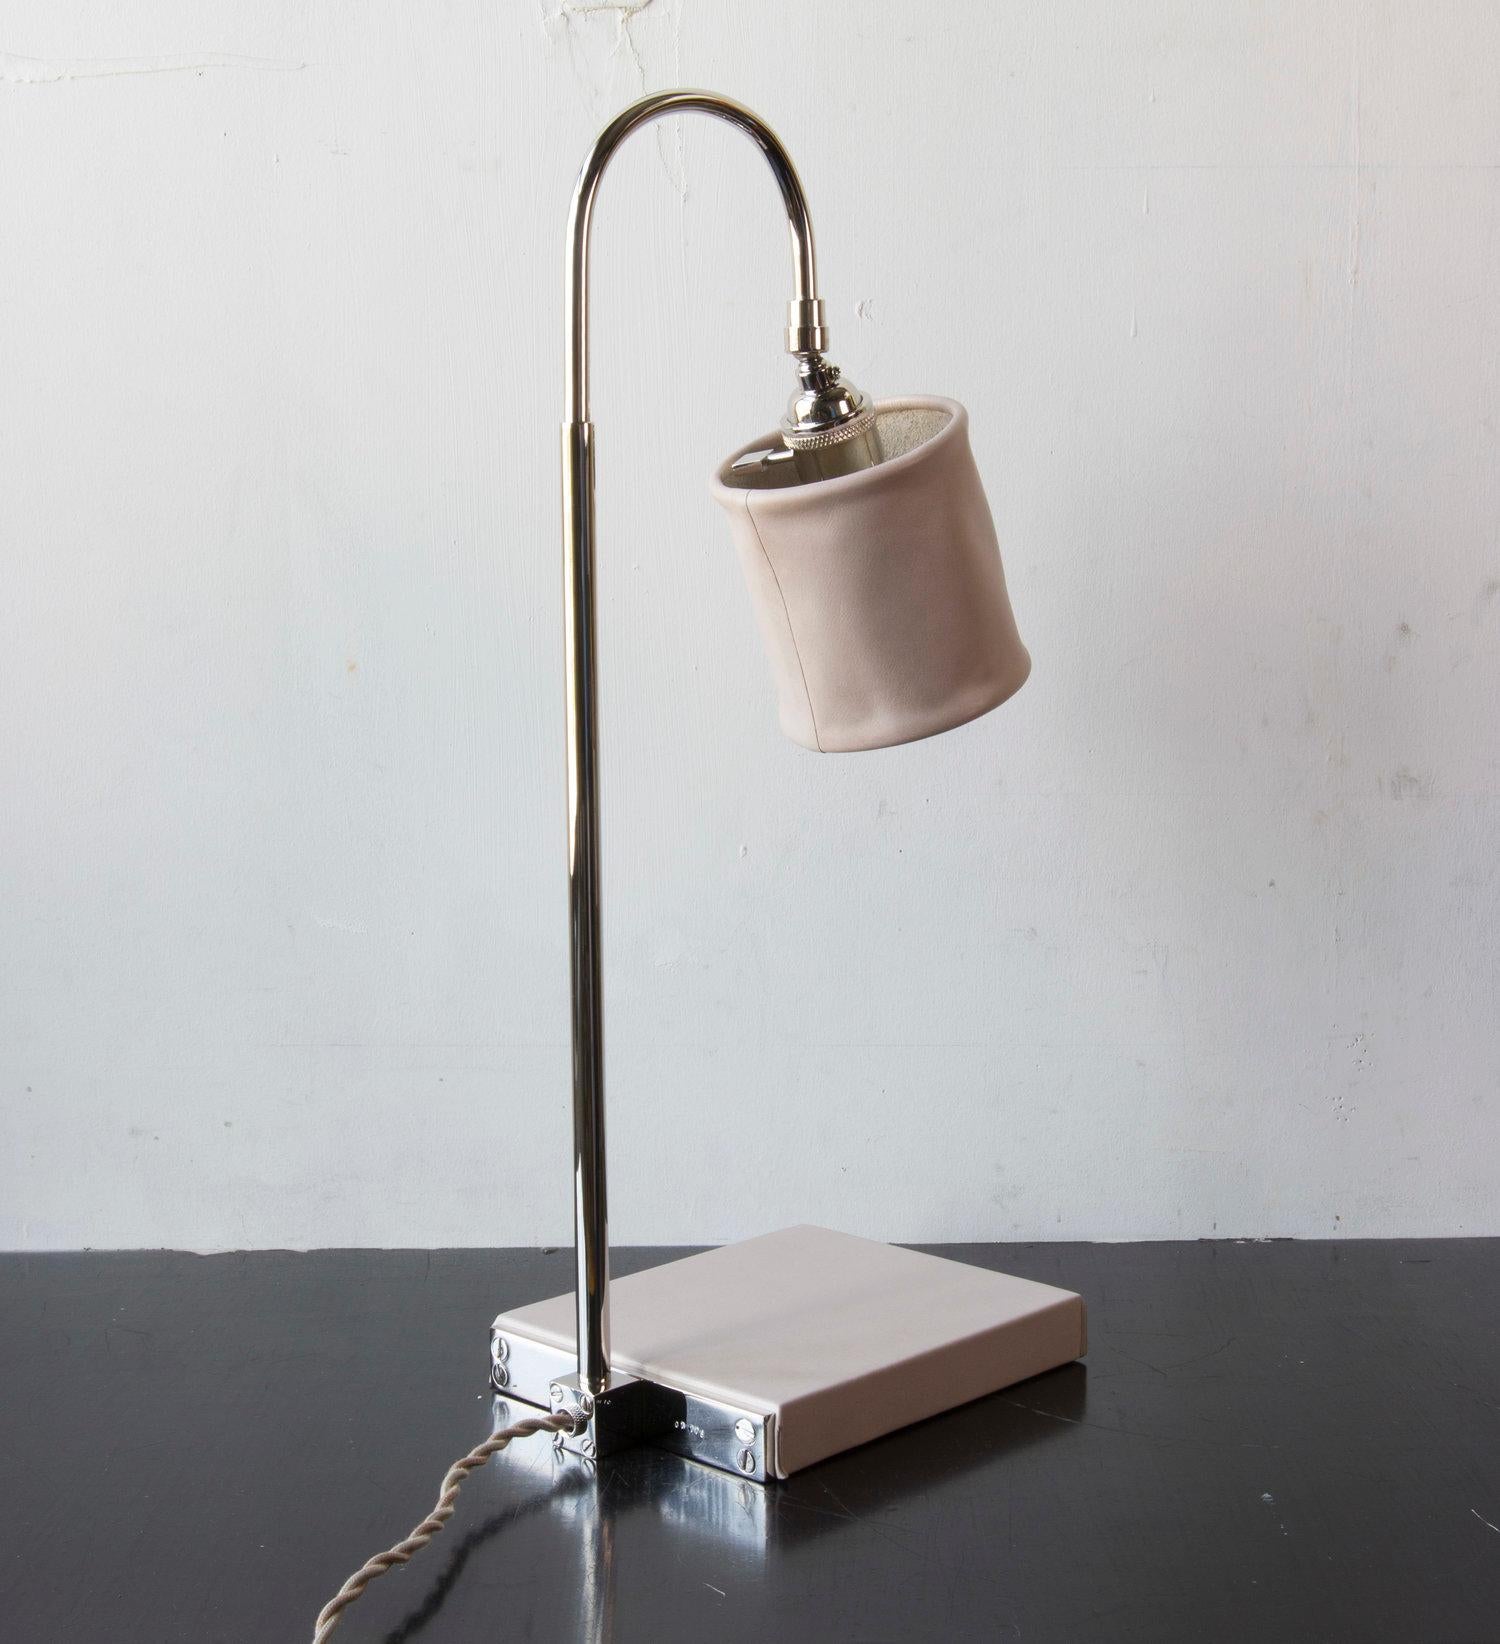 Solid machined brass in polished nickel-plated finish, hand-dyed and waxed leather wrapped wood, soft unstructured pivoting leather shade, hand-dyed braided cotton cord. All material finishes are living finishes: they will change and patina for the